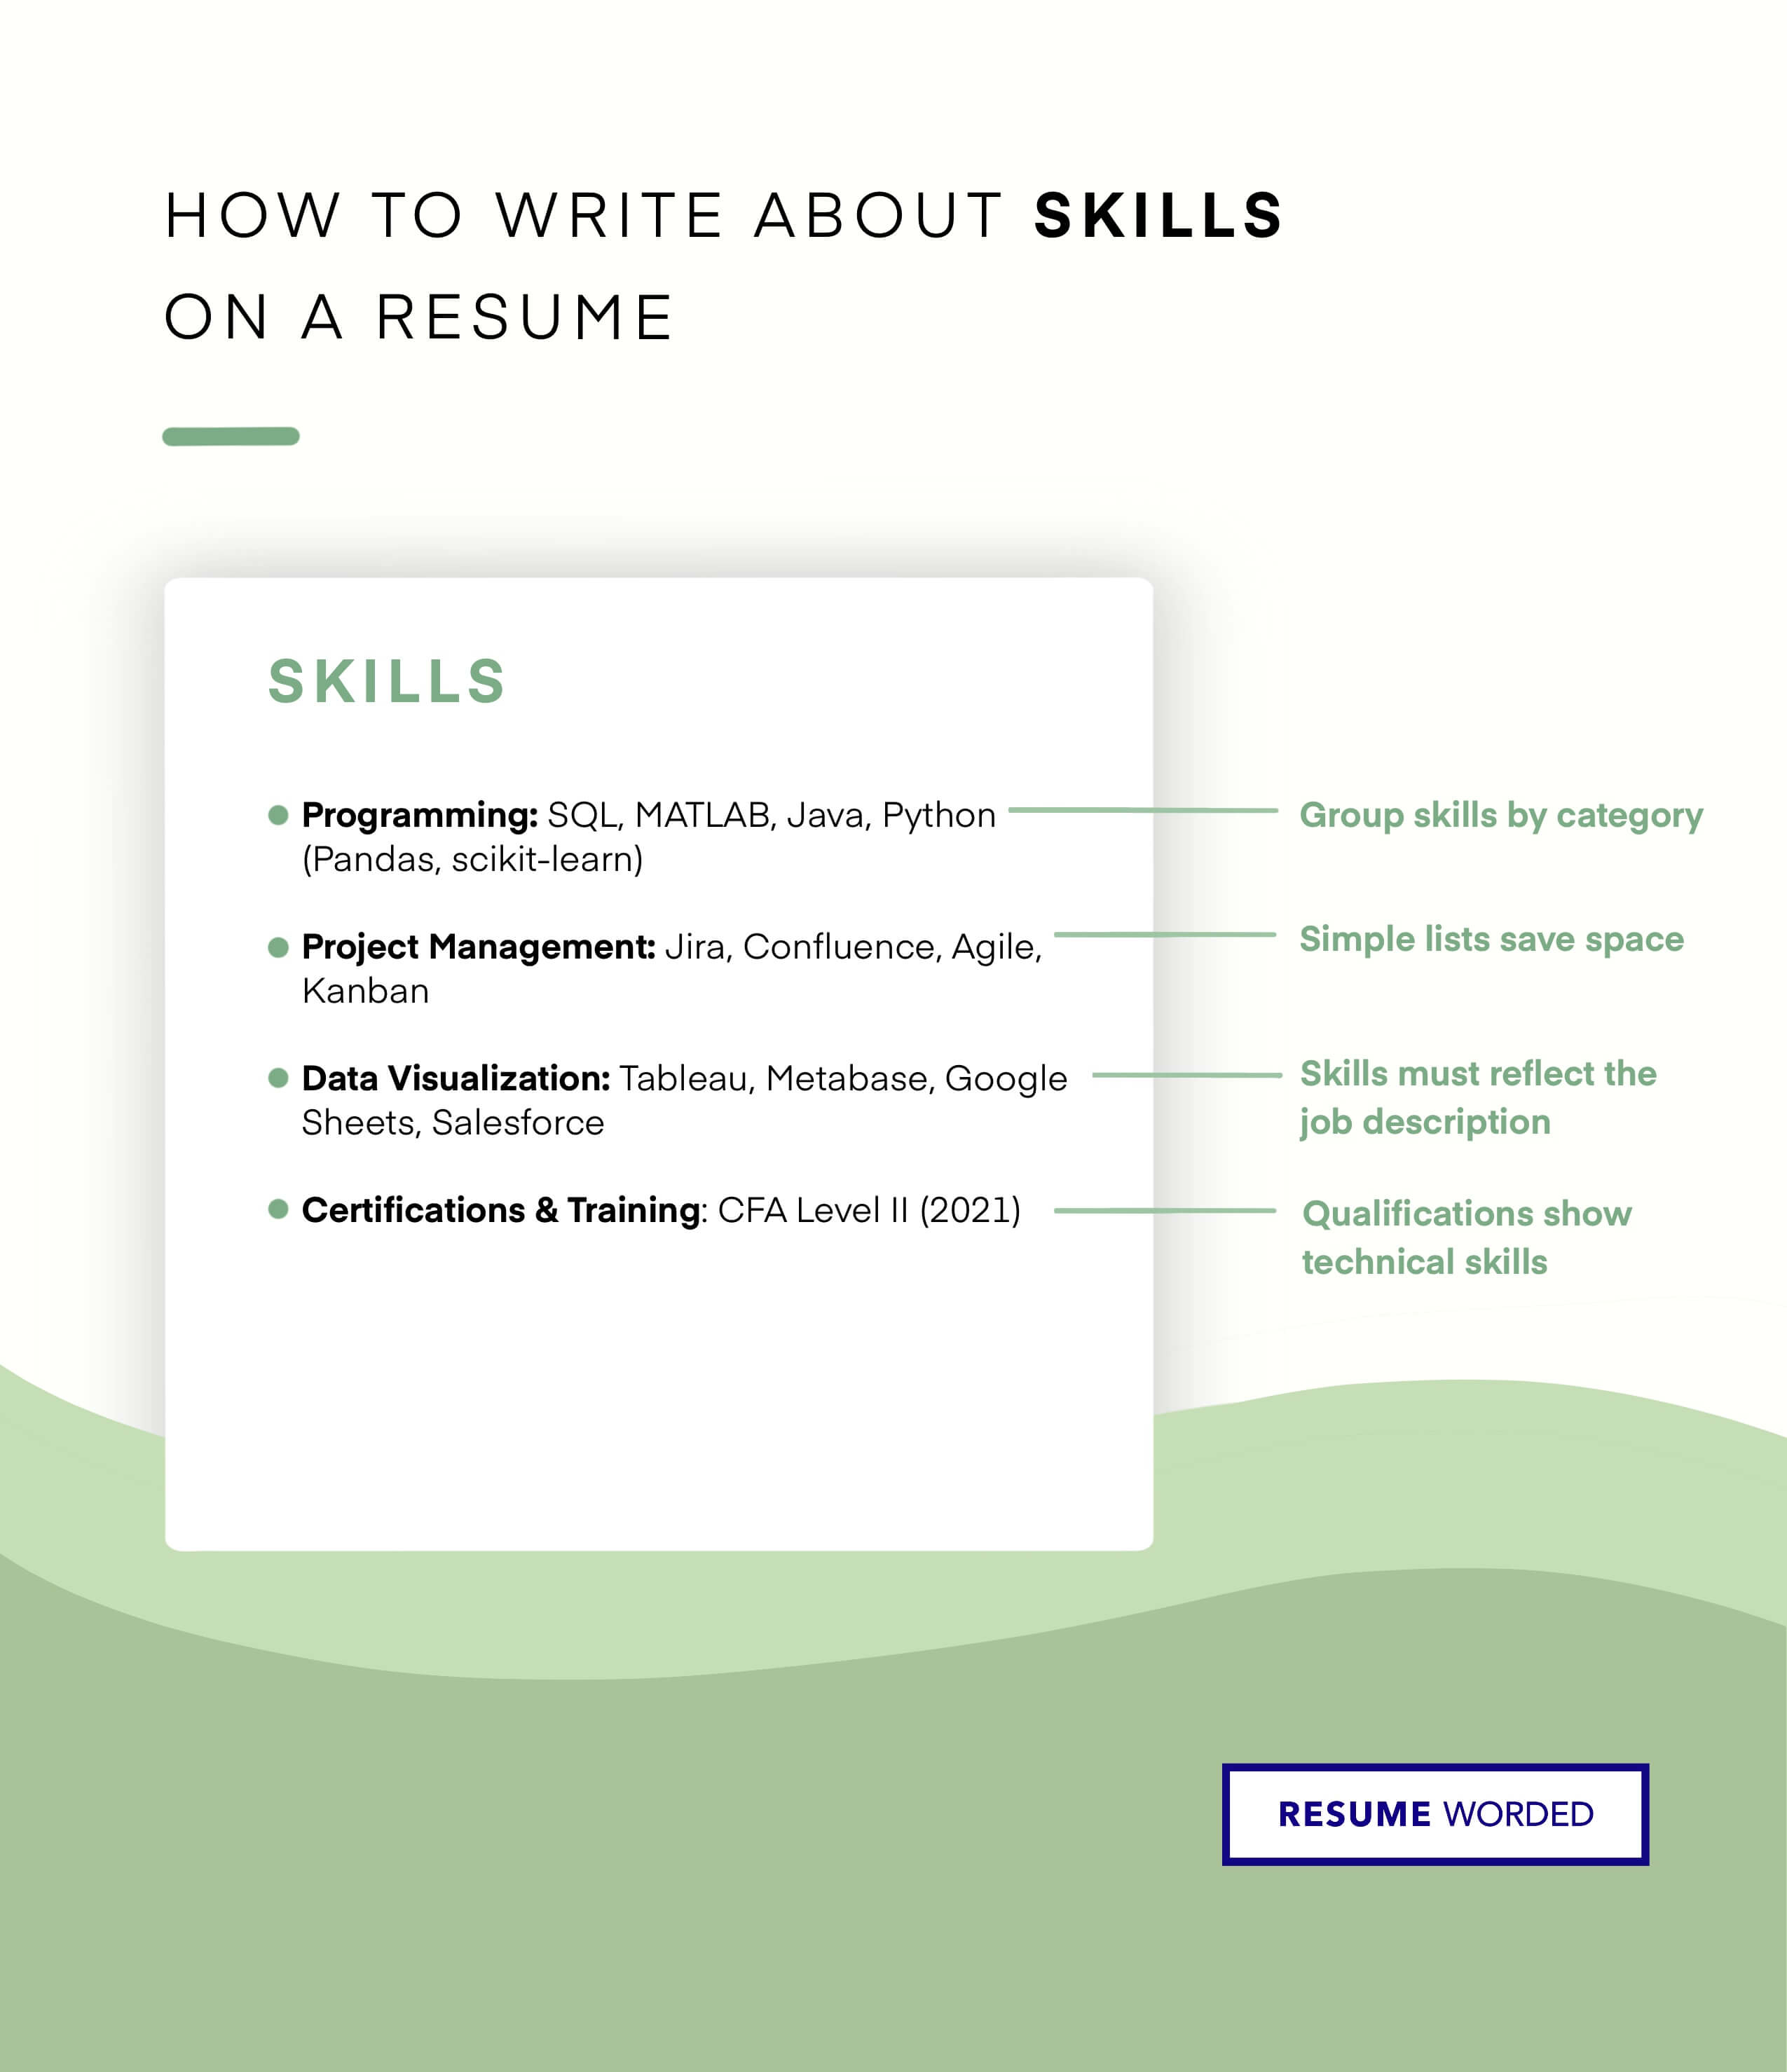 Technical skills are listed separately - Immigration Lawyer Resume